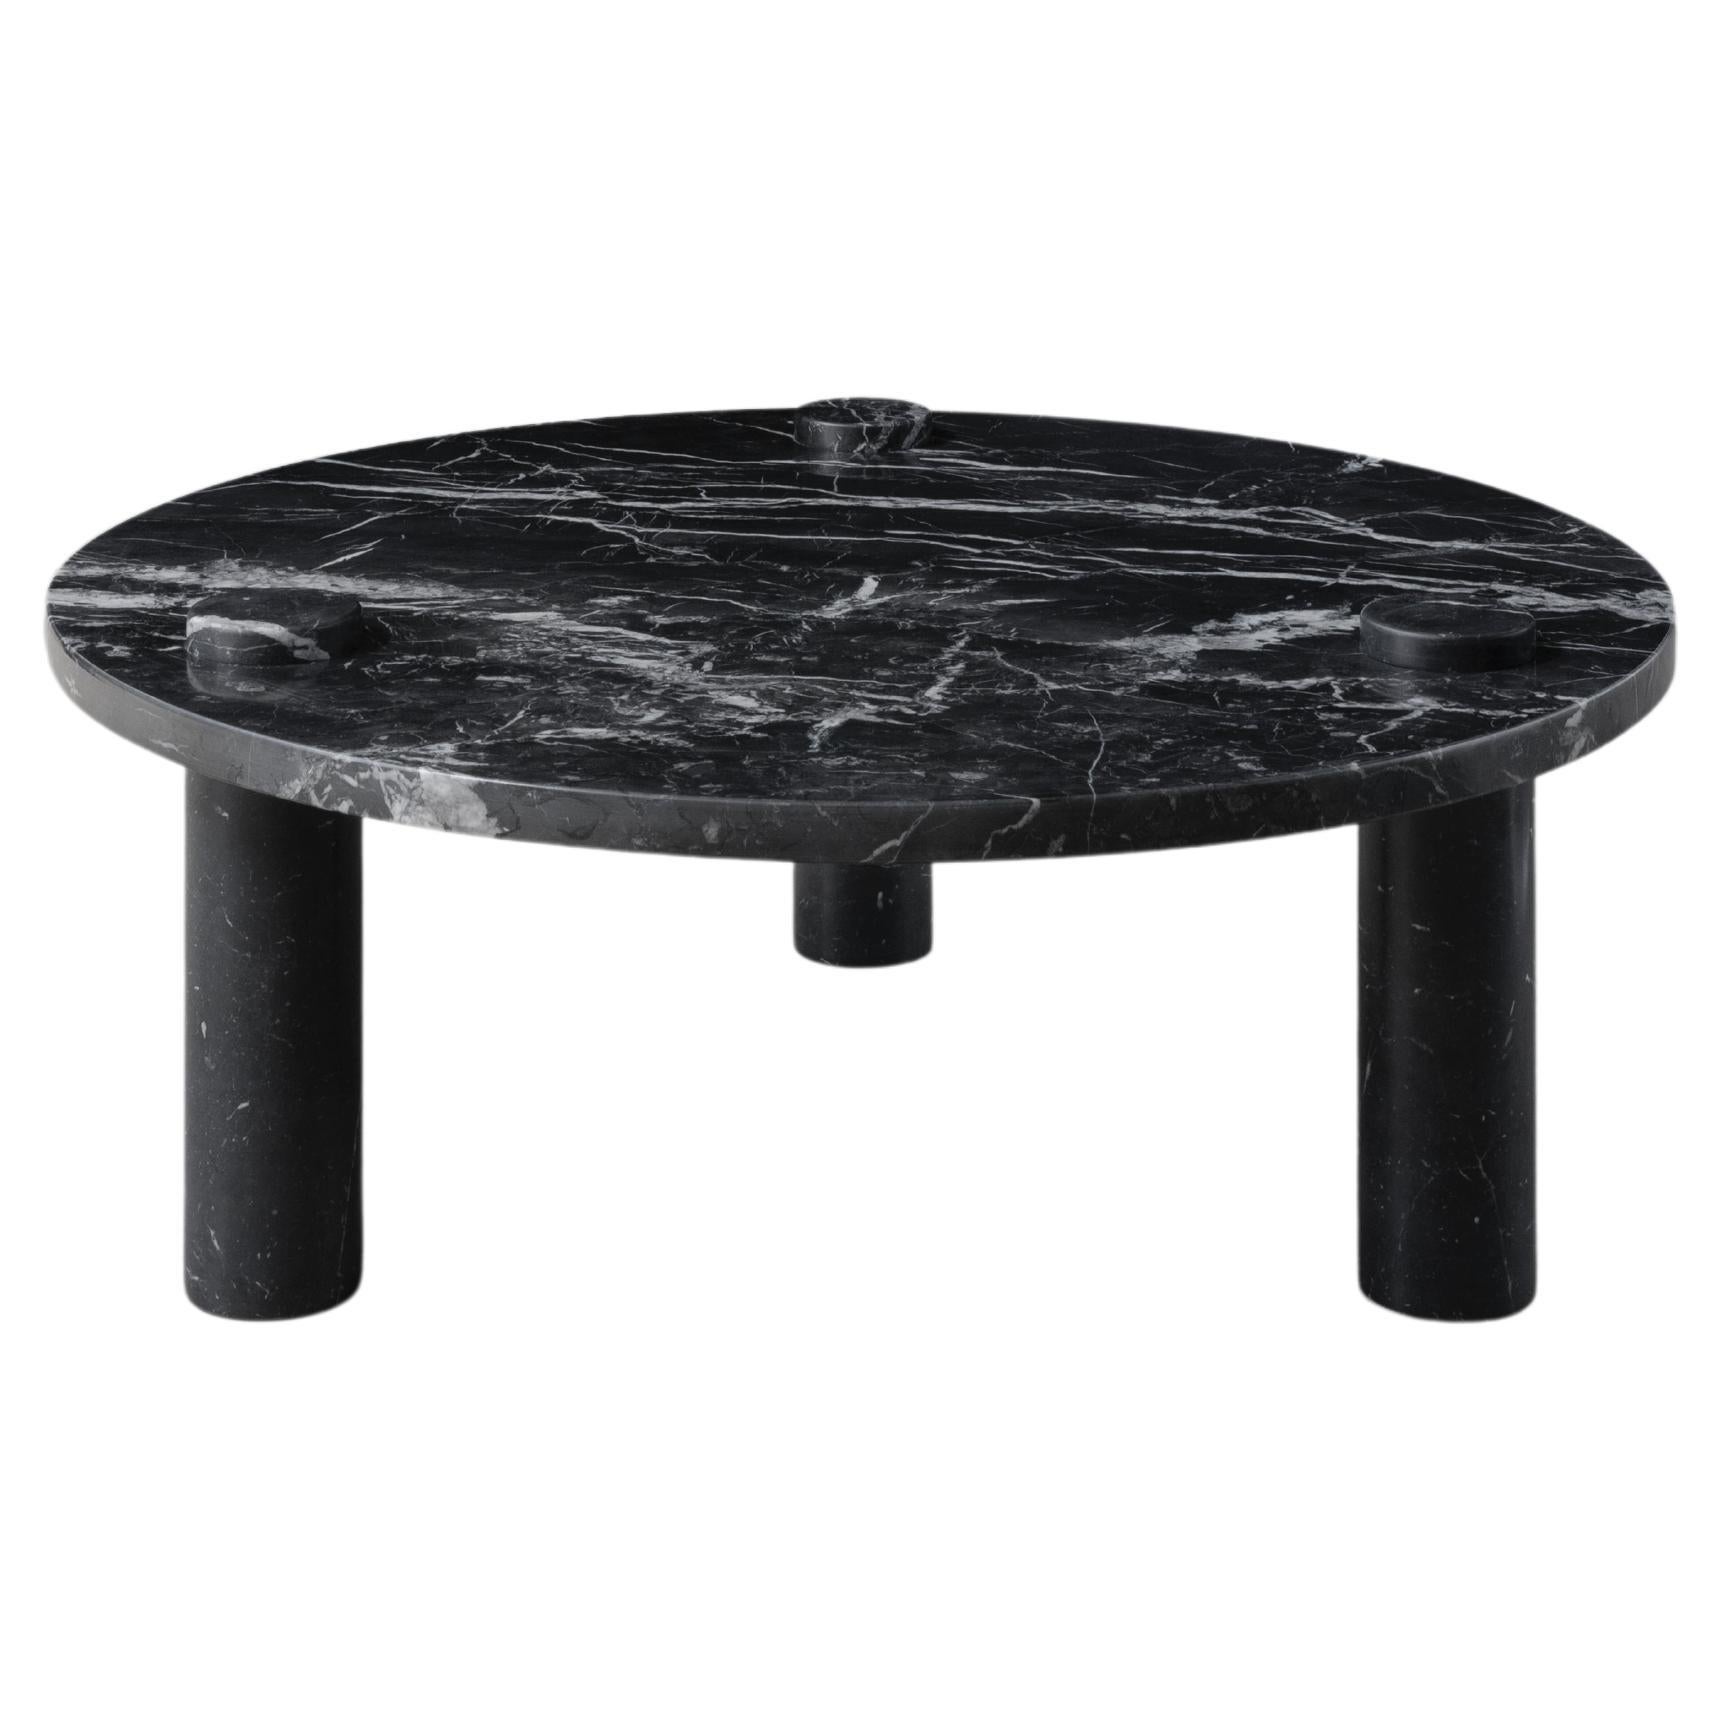 Sienna Coffee Table by Agglomerati